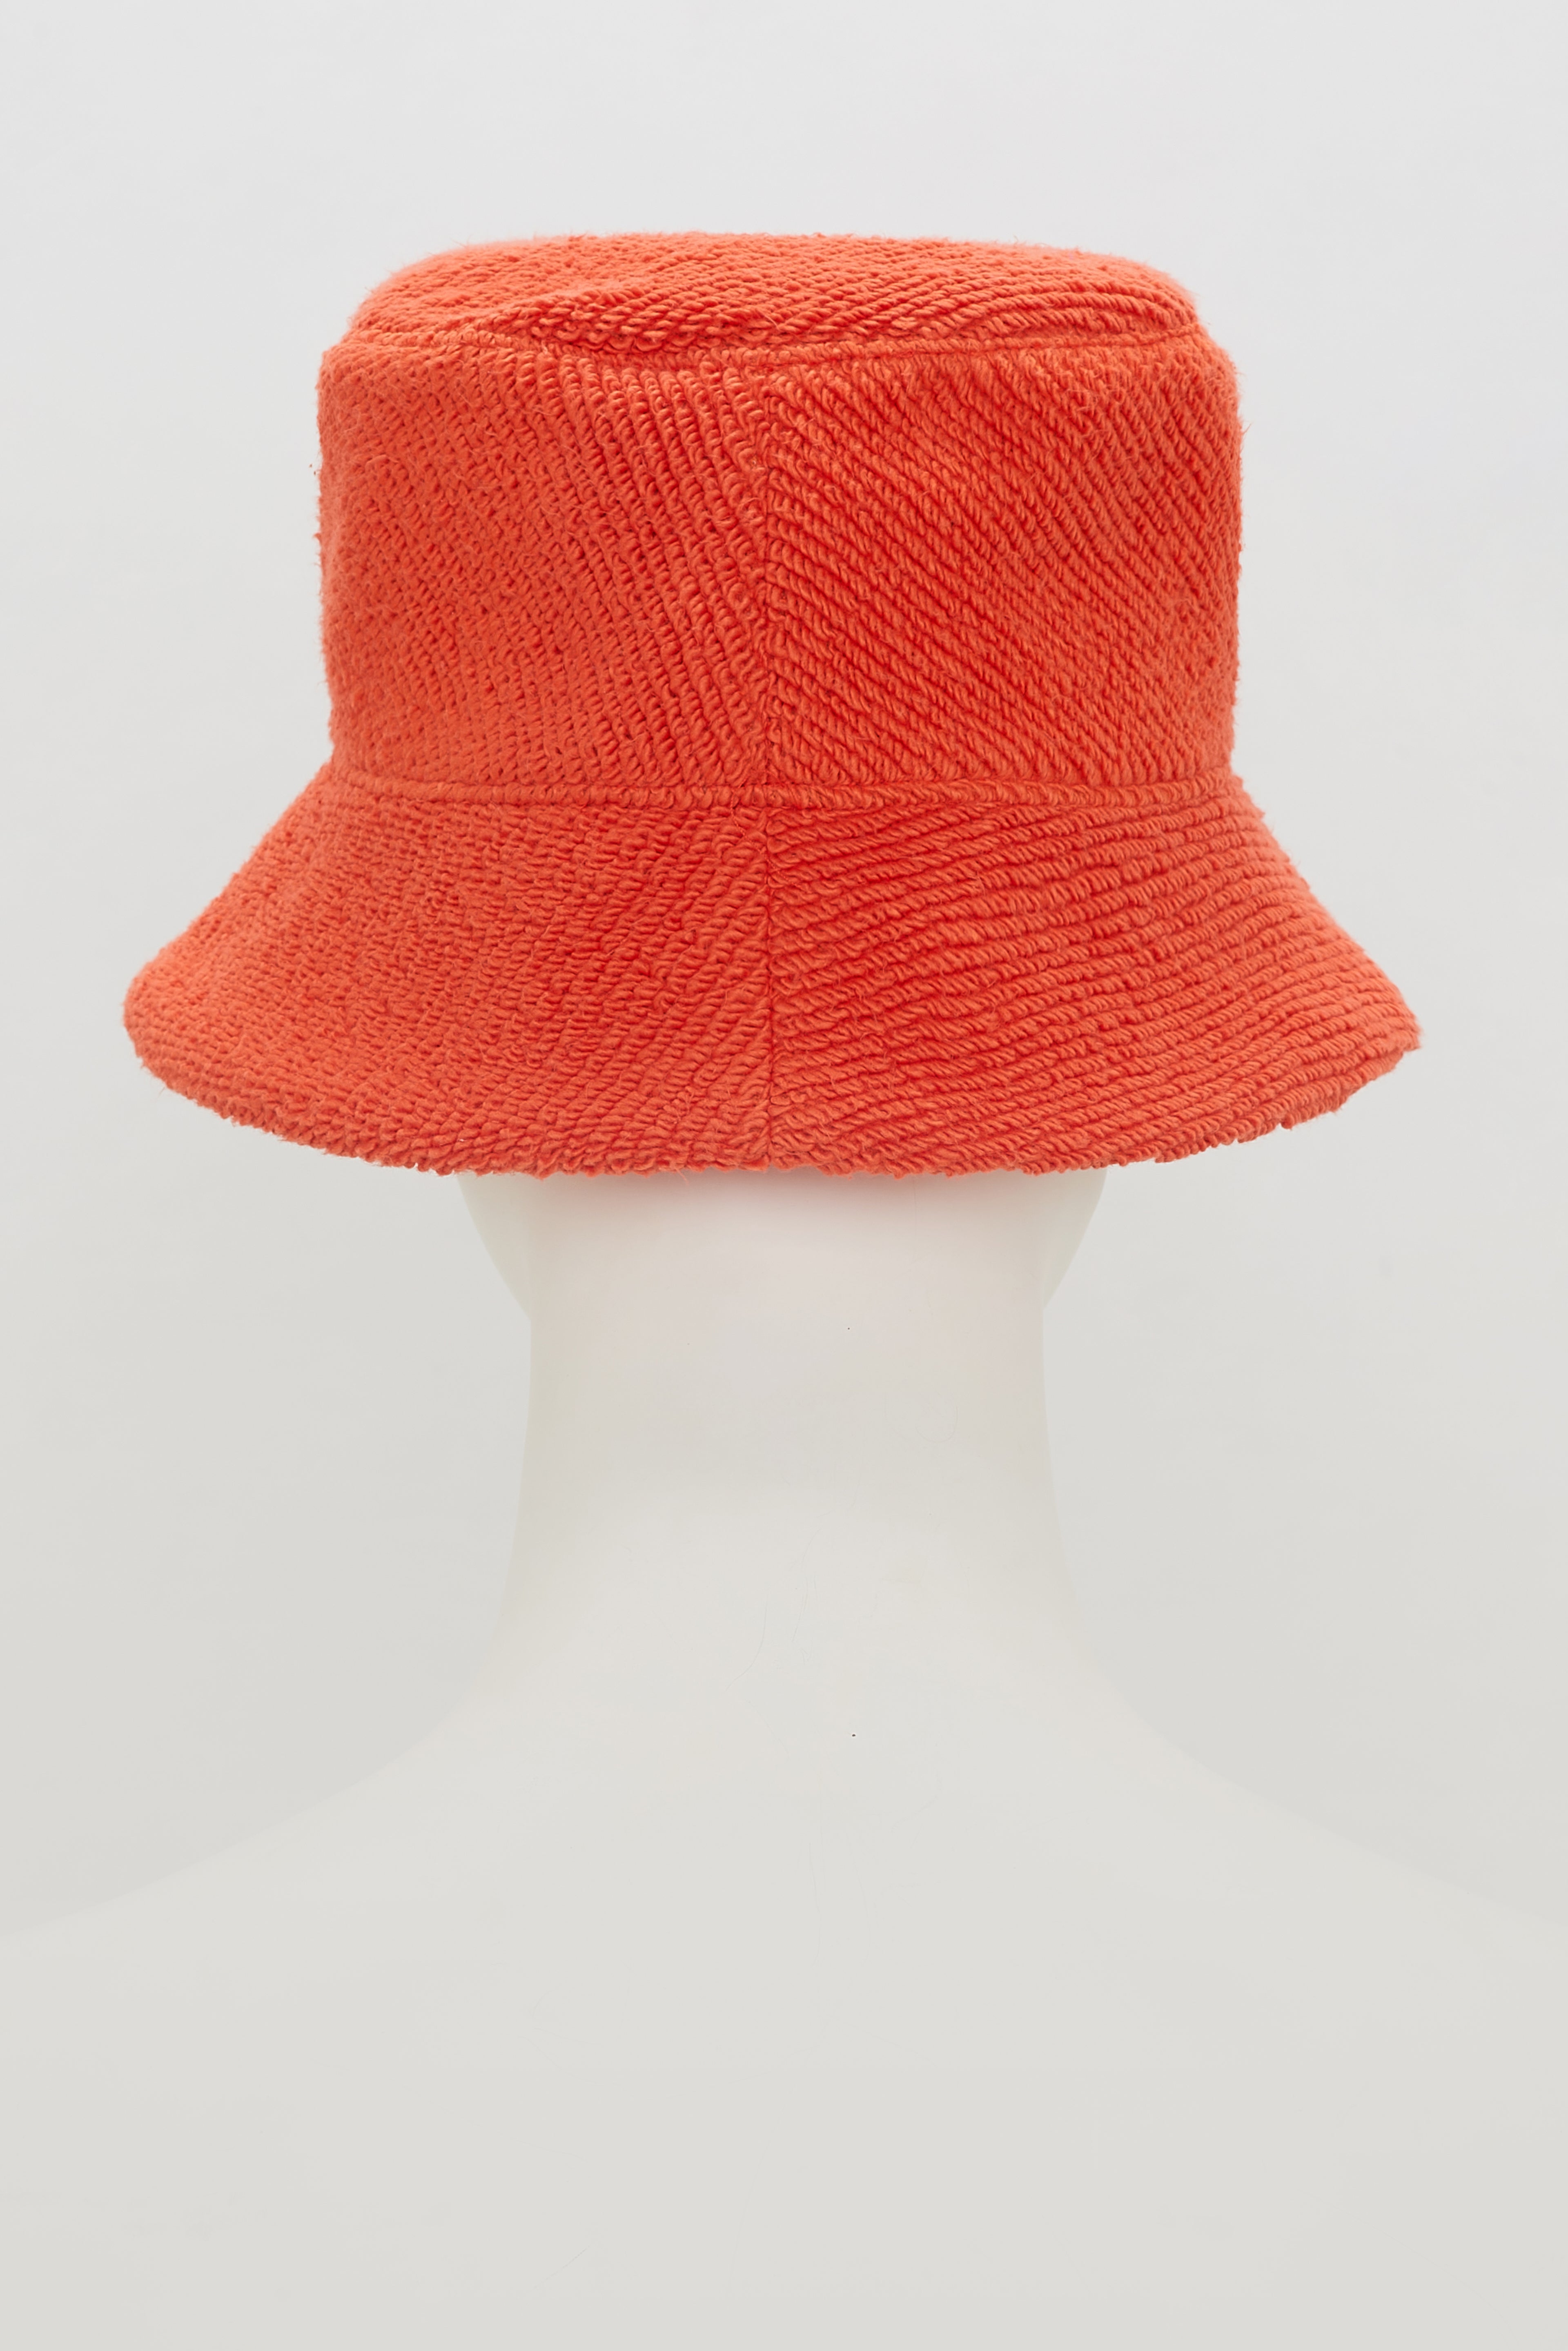 Dorothee-Schumacher-OUTLET-SALE-MODERN-TOWELLING-hat-Accessoires-OS-spiced-orange-ARCHIVE-COLLECTION-4.jpg